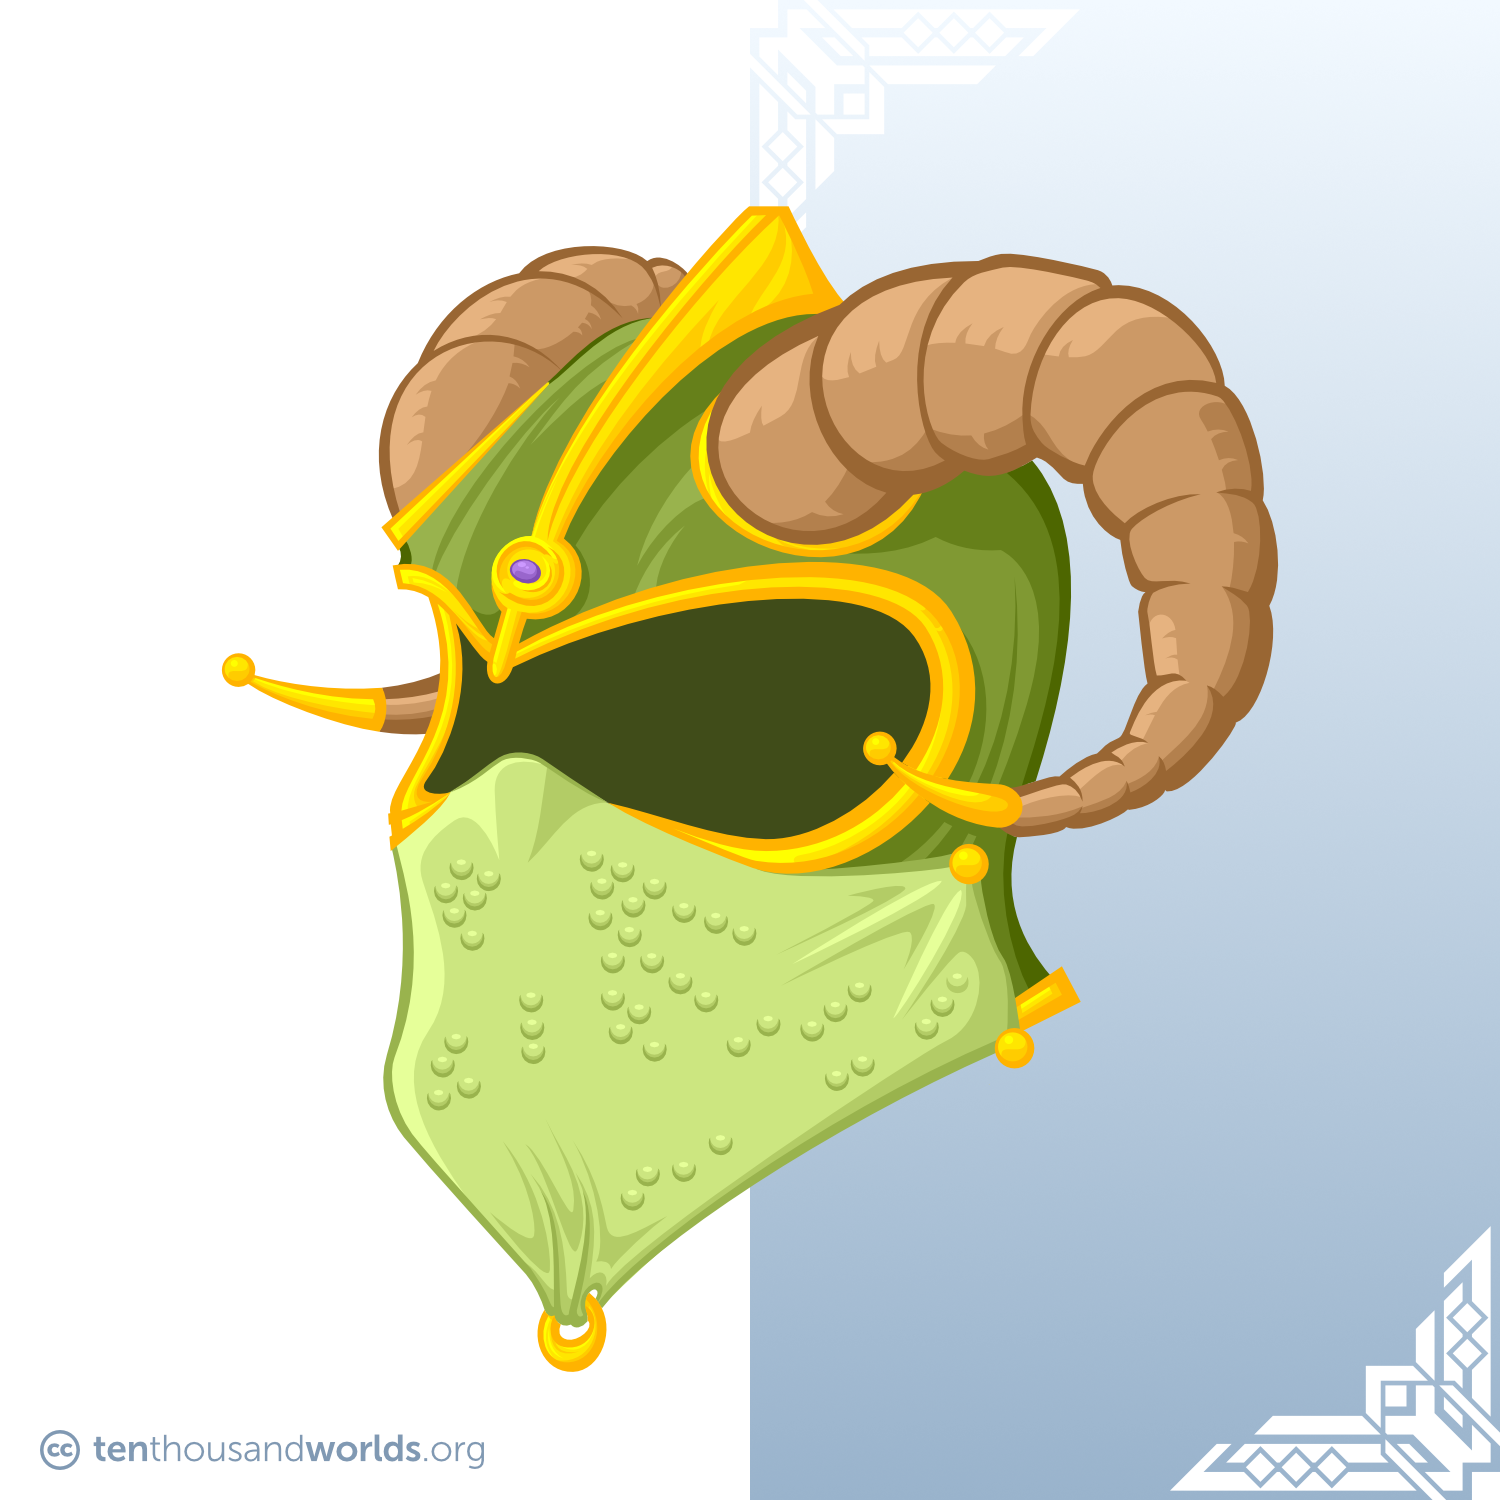 A bullet-shaped green-painted helmet with gold accents, adorned with a central fin, a purple jewel set in the forehead, and a massive pair of gold-tipped ram’s horns. A chain-mail veil protects the area around the nose and mouth.